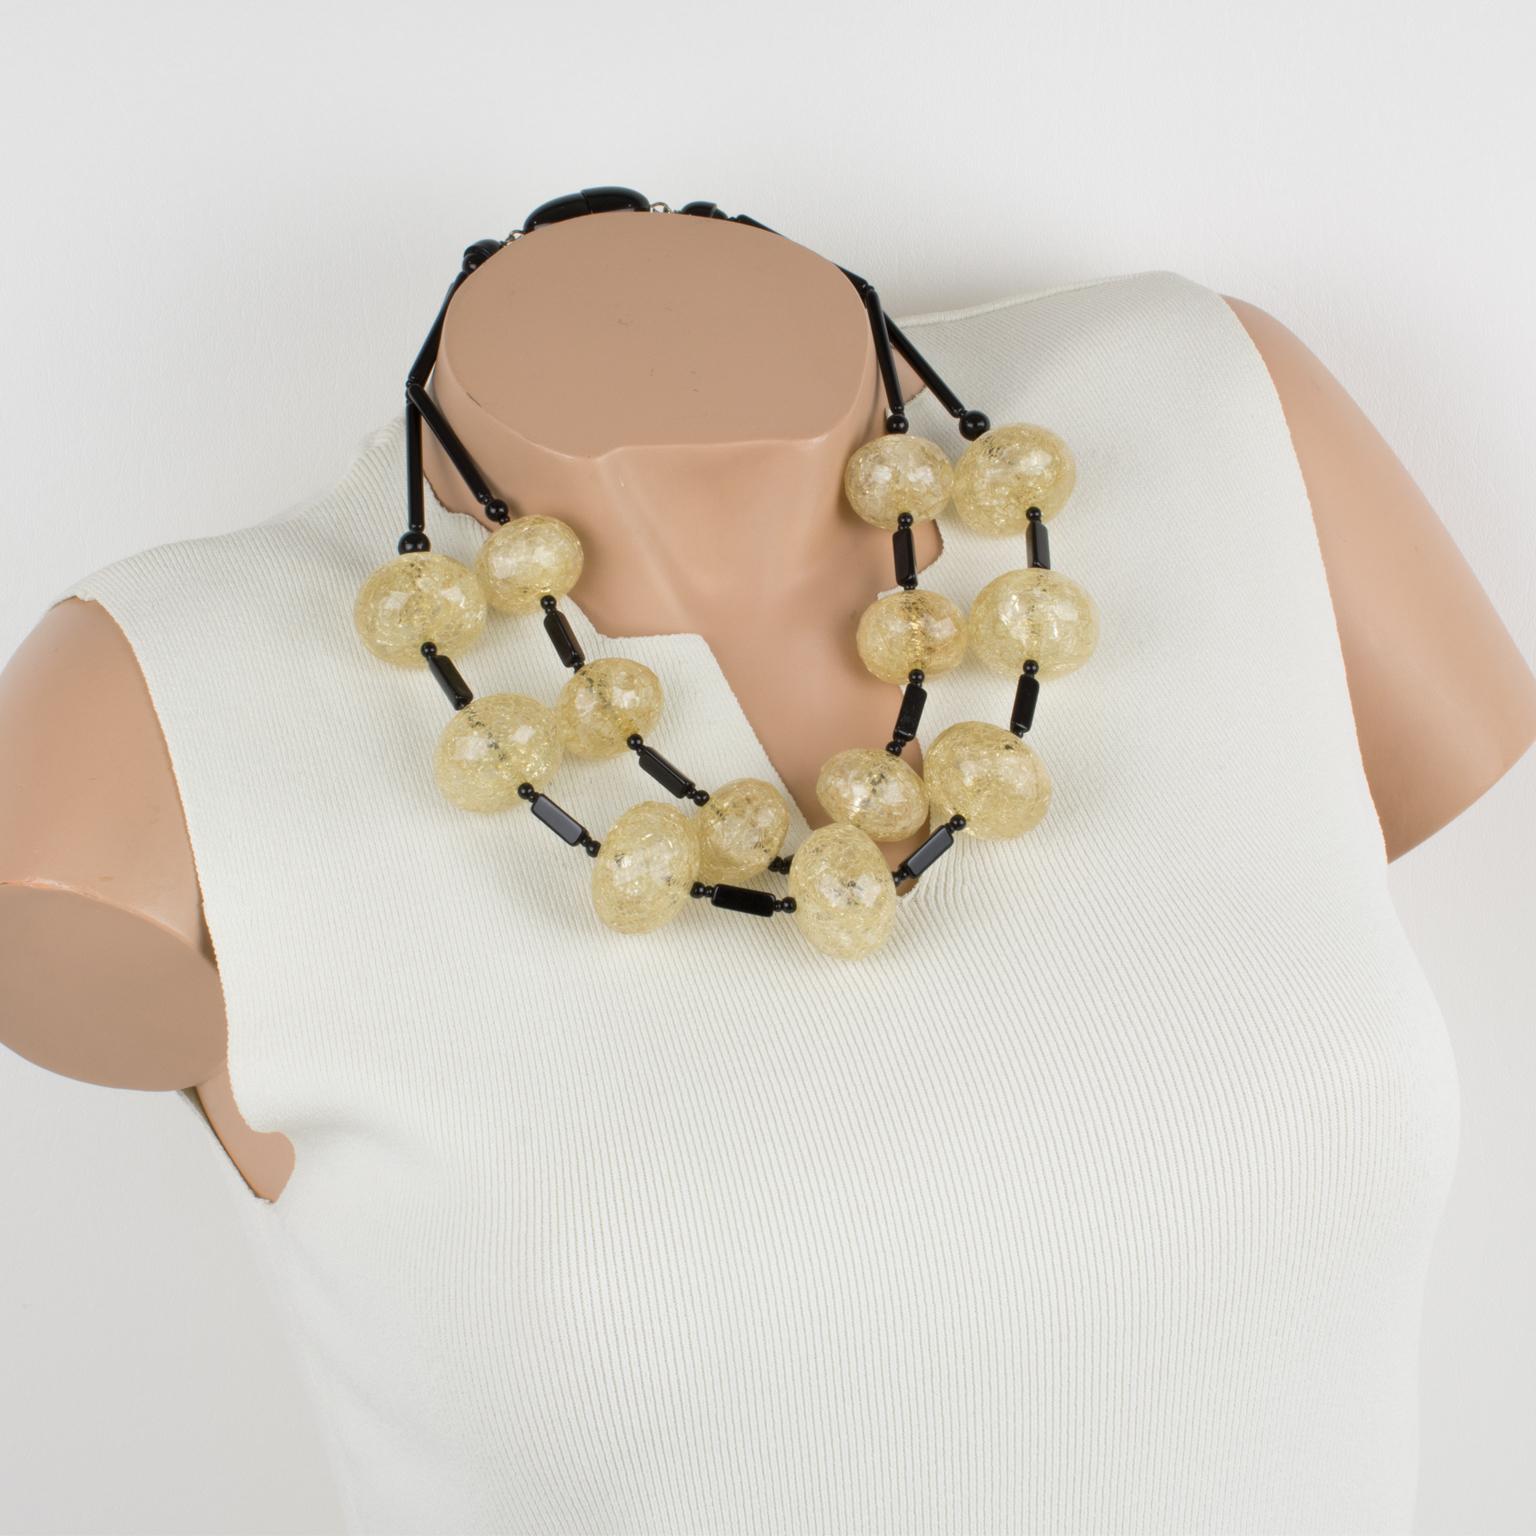 Elegant Angela Caputi, made in Italy choker beaded necklace. Double strand shape build with large fractal resin beads in light beige champagne color, compliment with black Lucite long stick beads. As you know Caputi jewelry is not signed. This is a